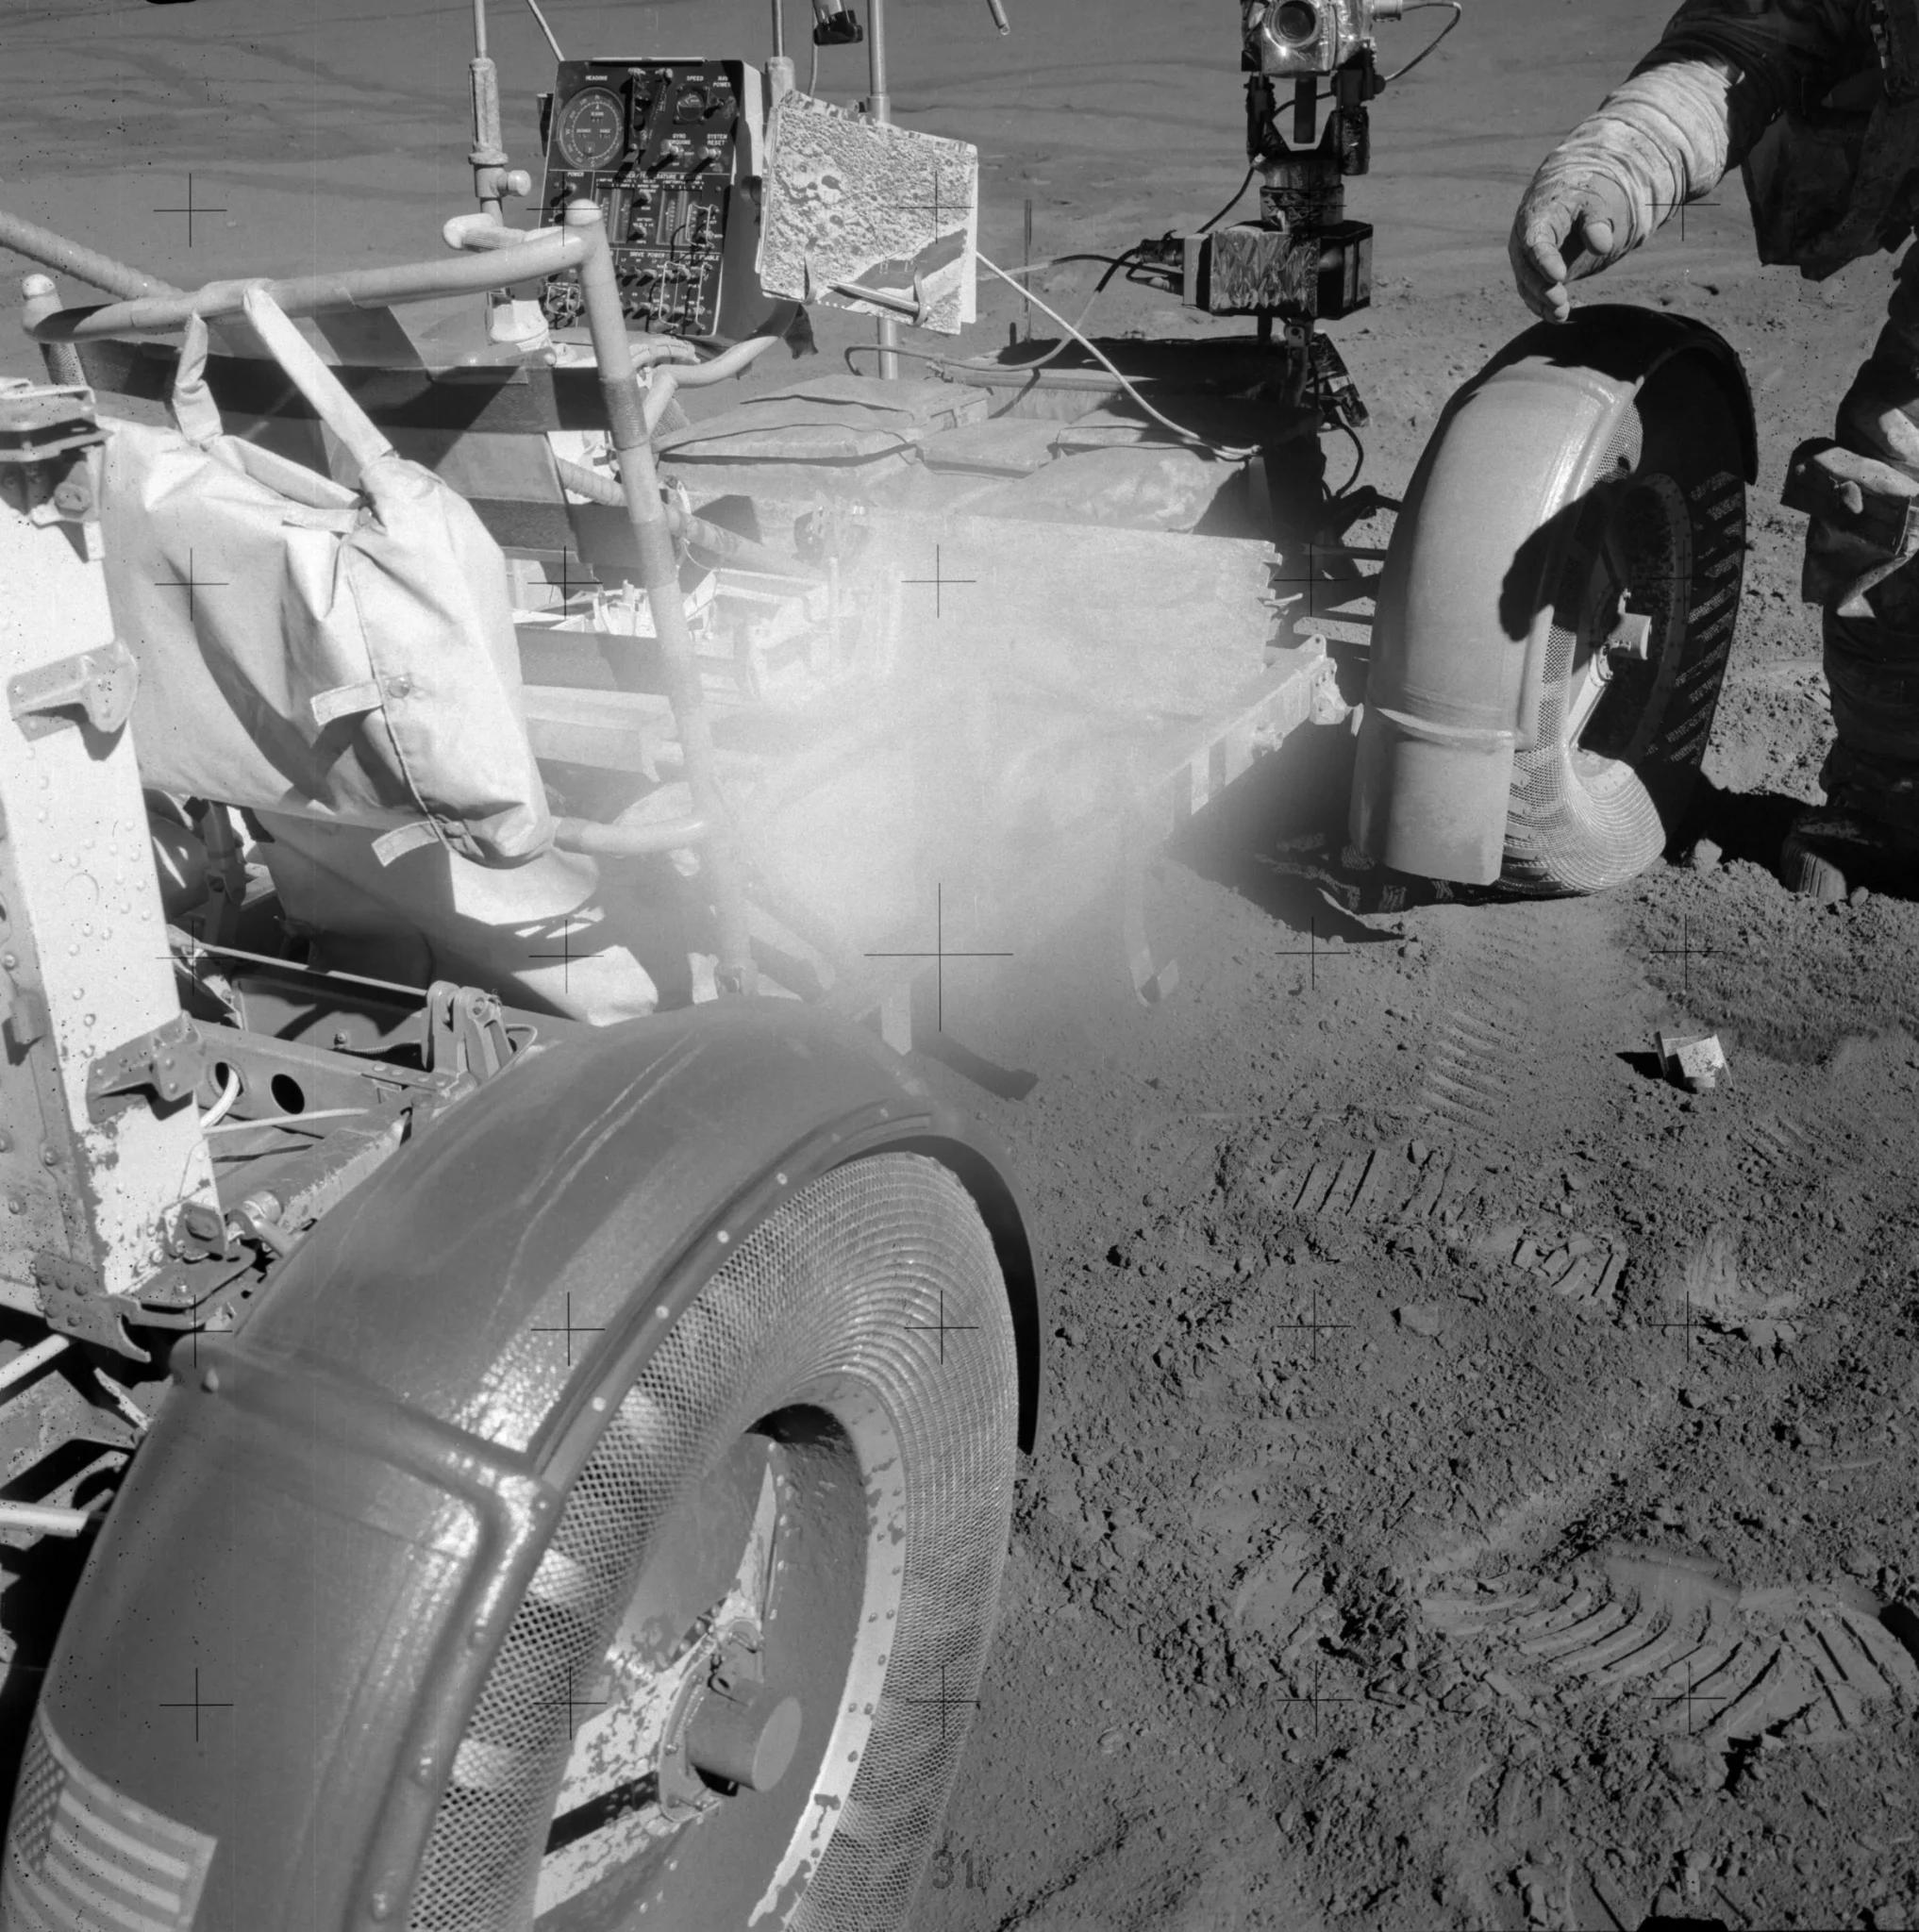 Dust covers the central part of the lens in this photograph, obscuring the subject. The photo is of a dust-covered lunar rover. Dust can be seen caking the wheel rims and bodywork, as well as the astronaut’s suit in the top right of the image. https://www.nasa.gov/history/alsj/picture.html